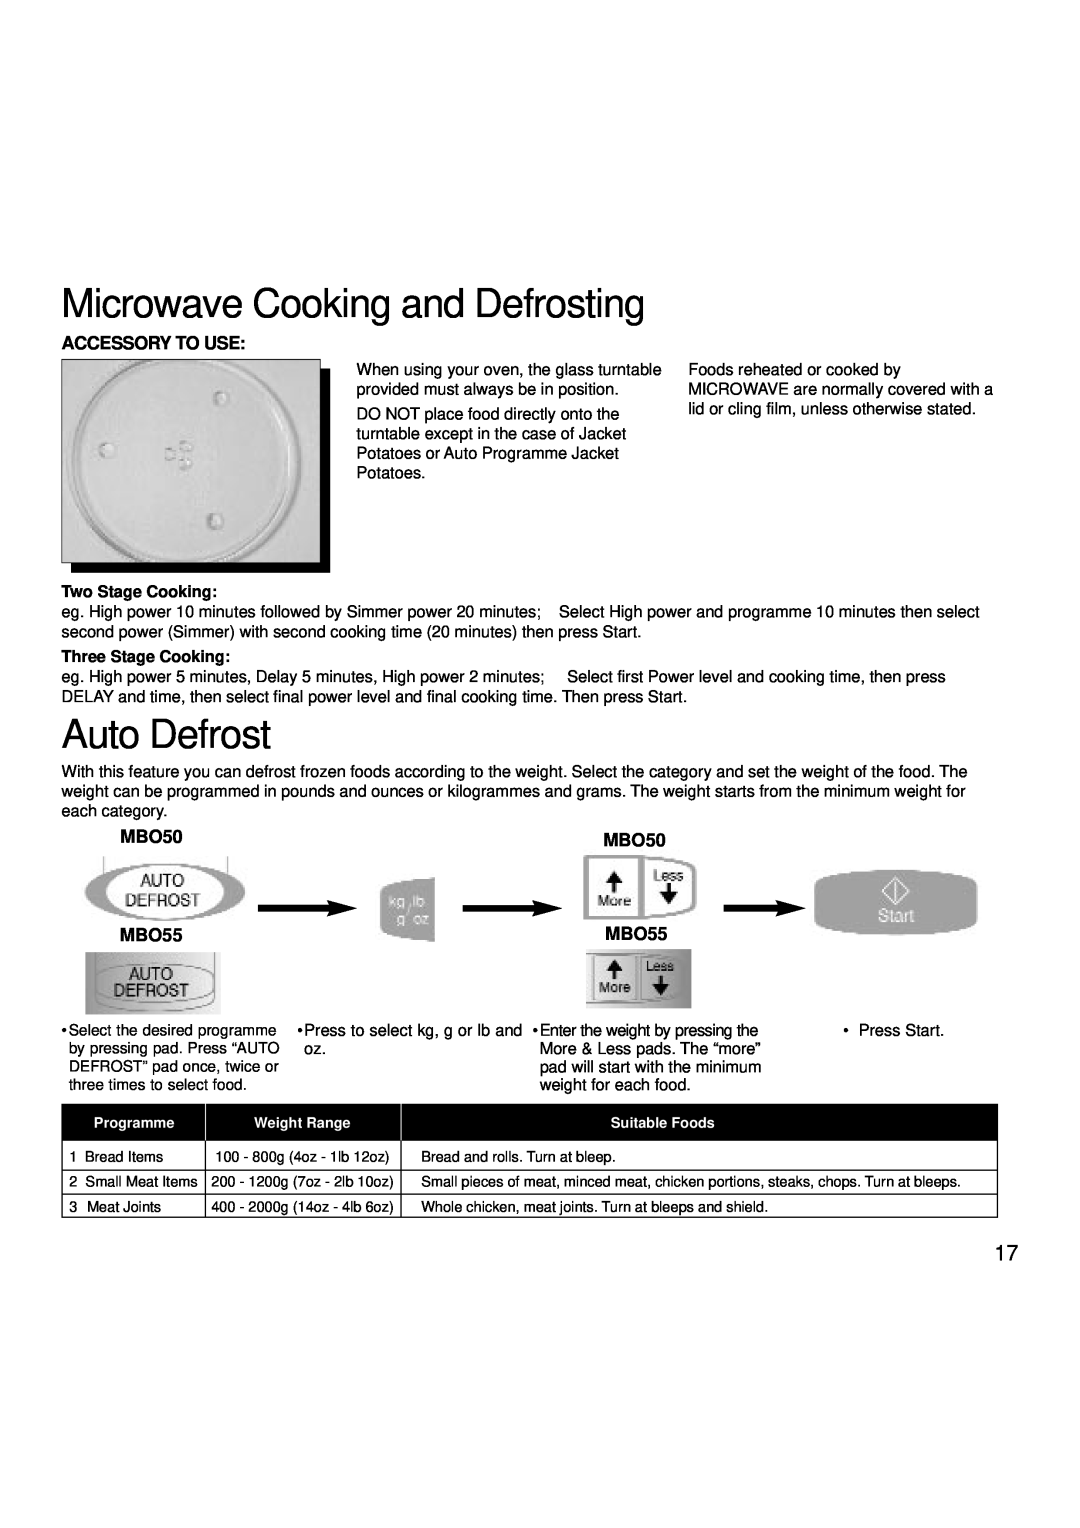 Creda MBO55 manual Auto Defrost, Accessory To Use, MBO50, Microwave Cooking and Defrosting, Two Stage Cooking 